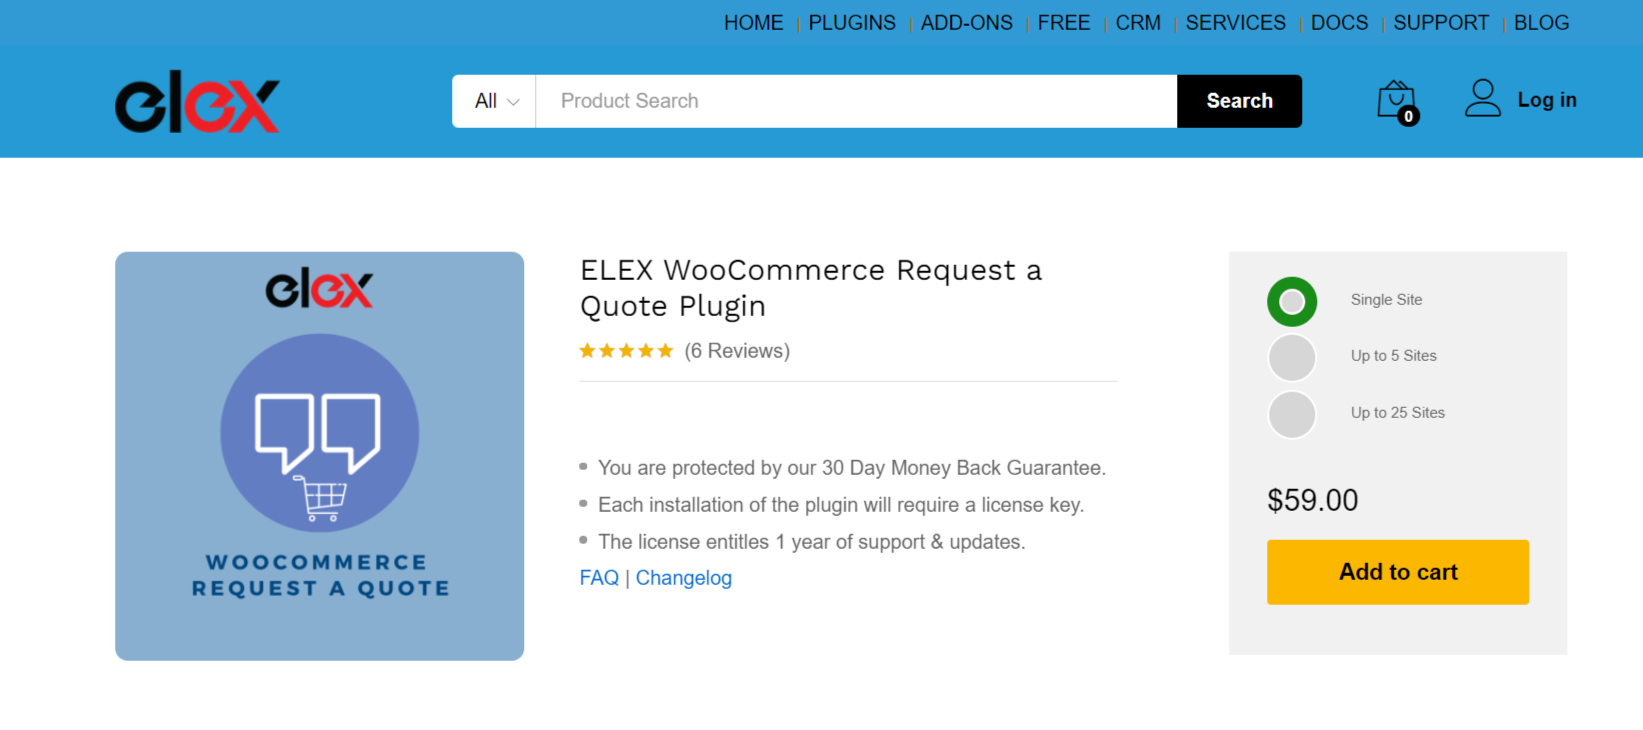 ELEXtensions request a quote product page with pricing of $59